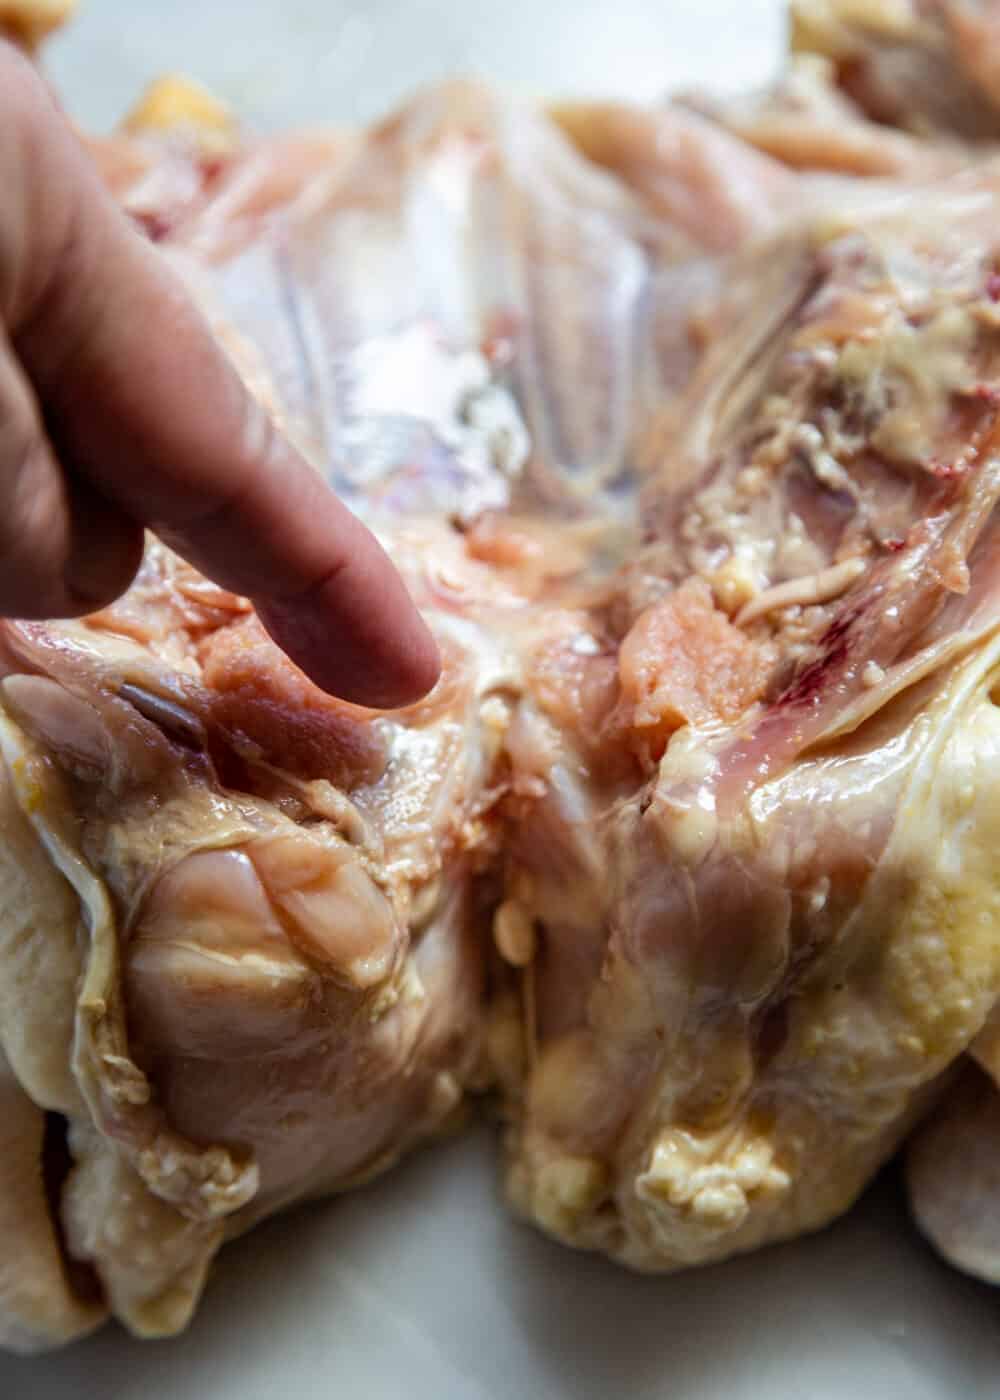 finger pointing to wishbone on inside of raw chicken